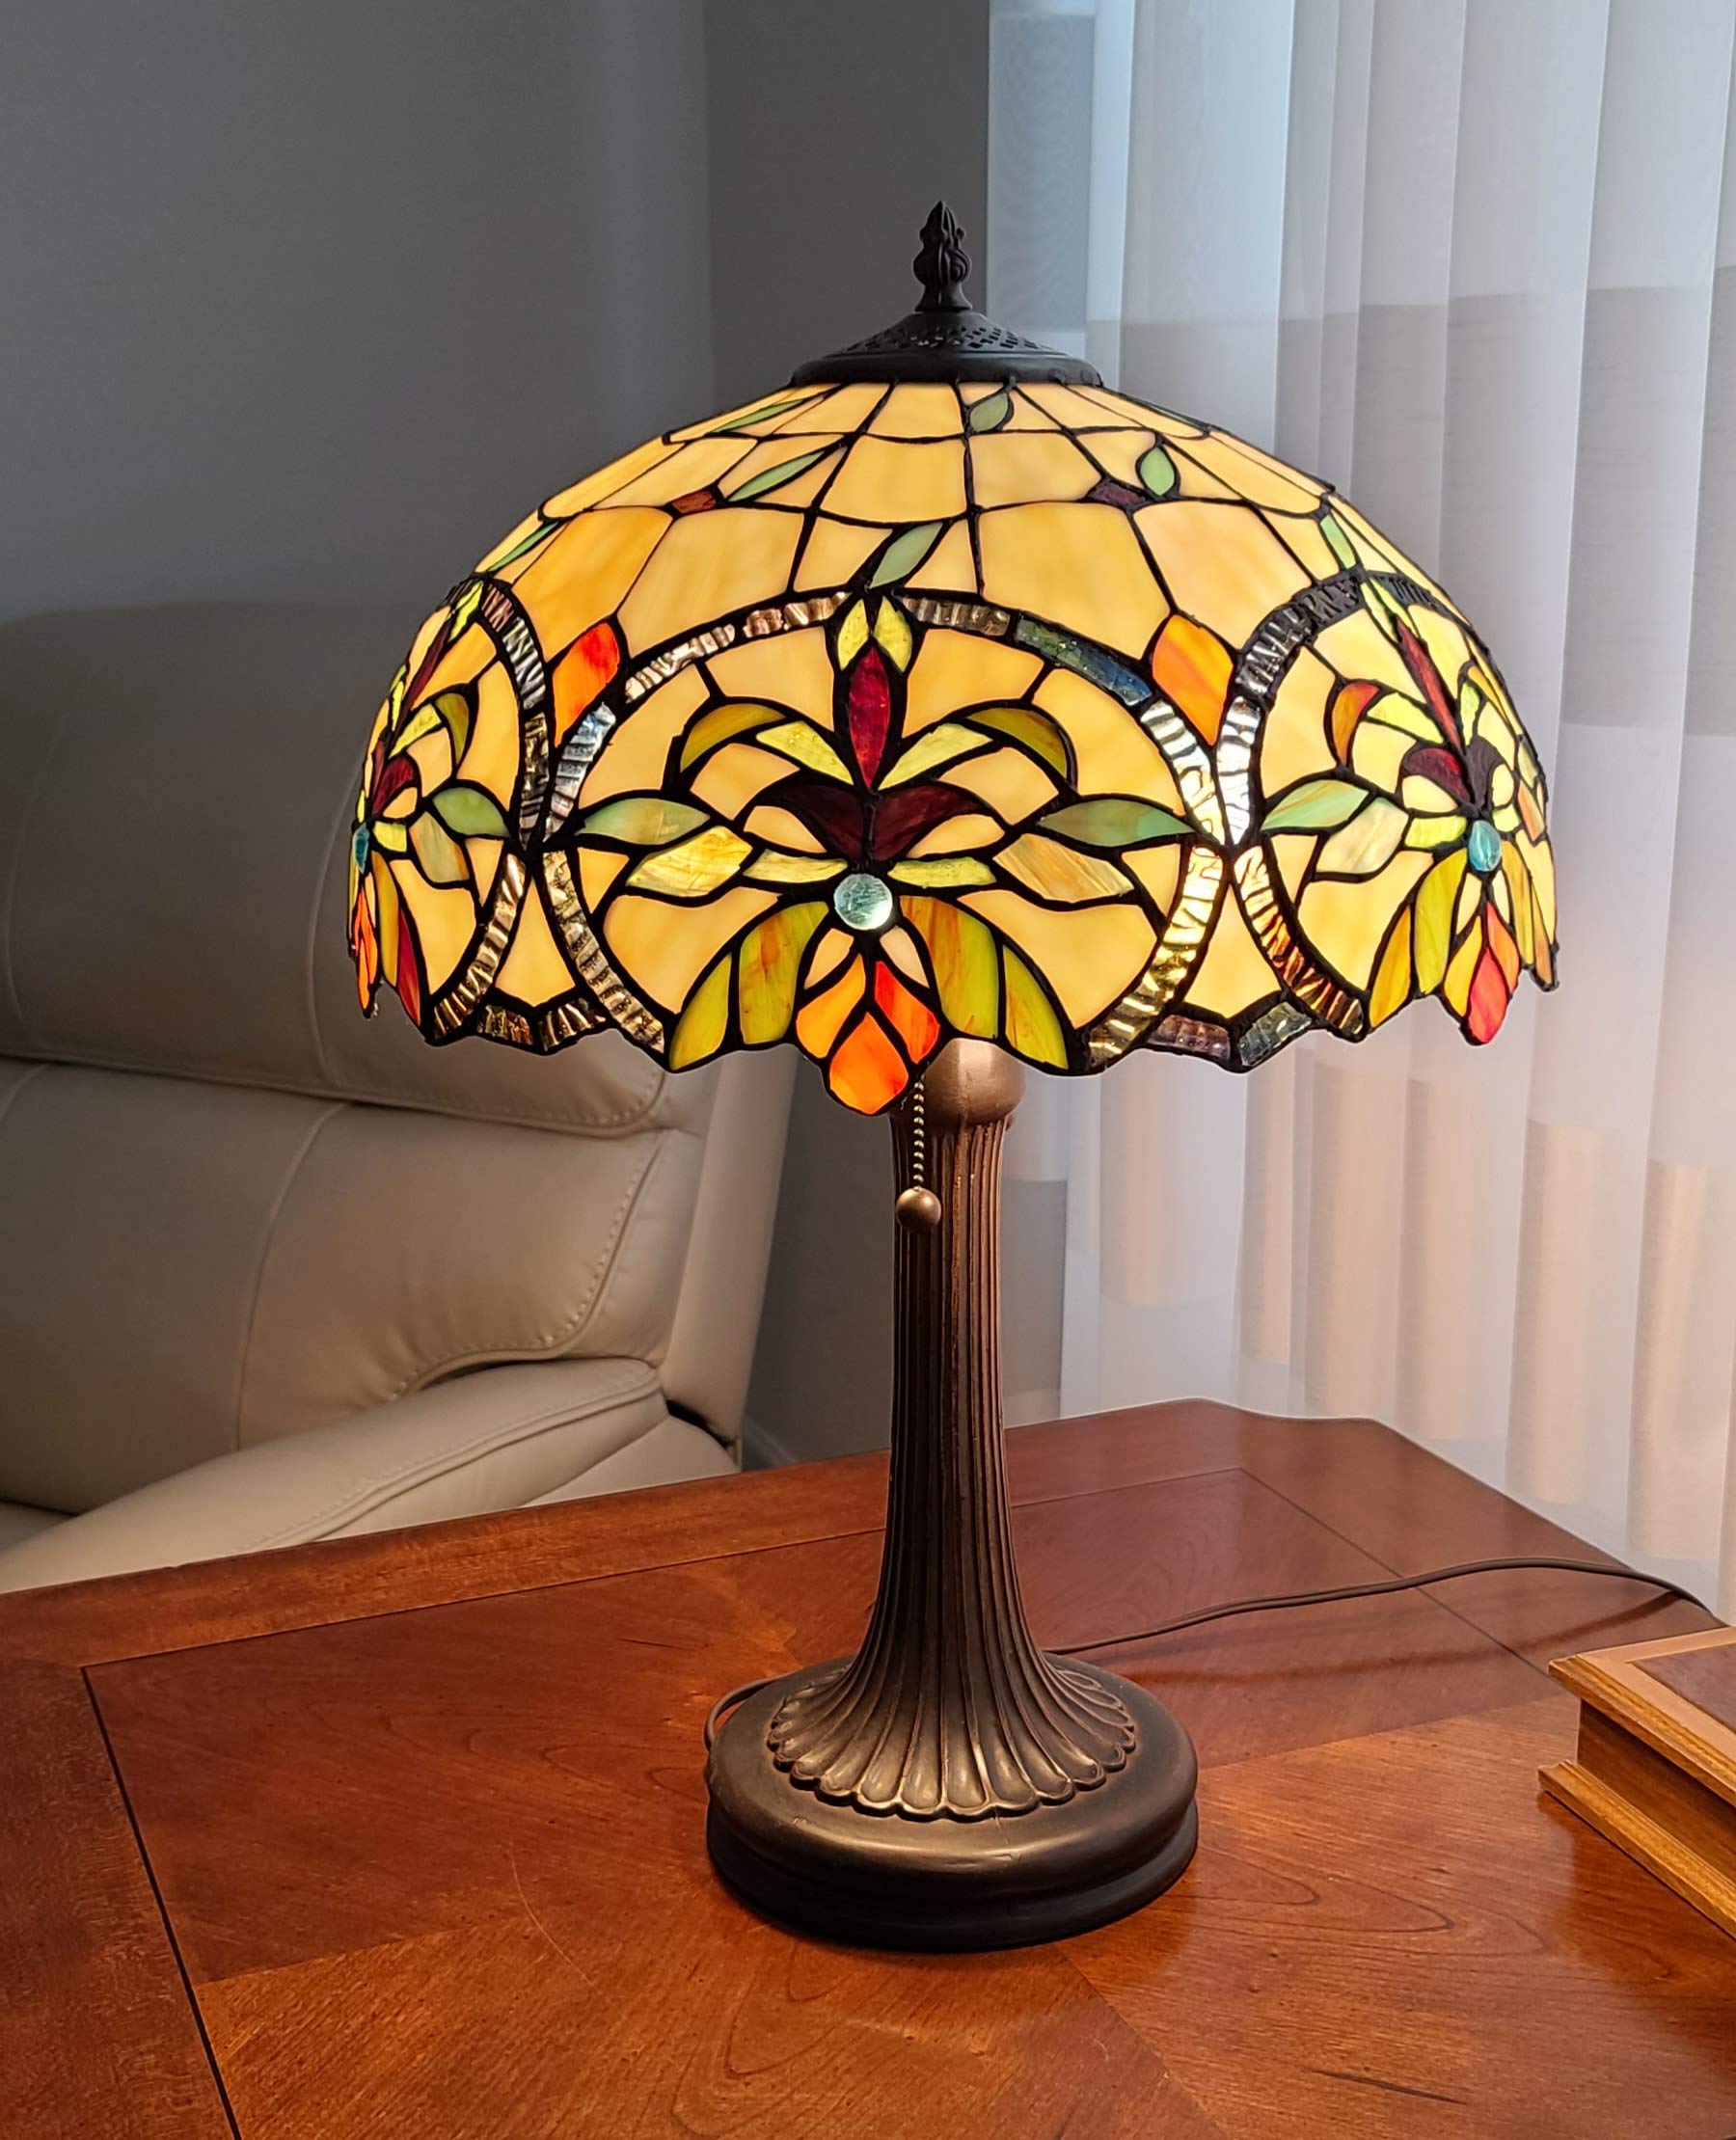 Tiffany Style Table Lamp Banker 23" Tall Stained Glass Green Tan Orange Yellow Floral Flower Vintage Antique Light Décor Living Room Bedroom Ha...